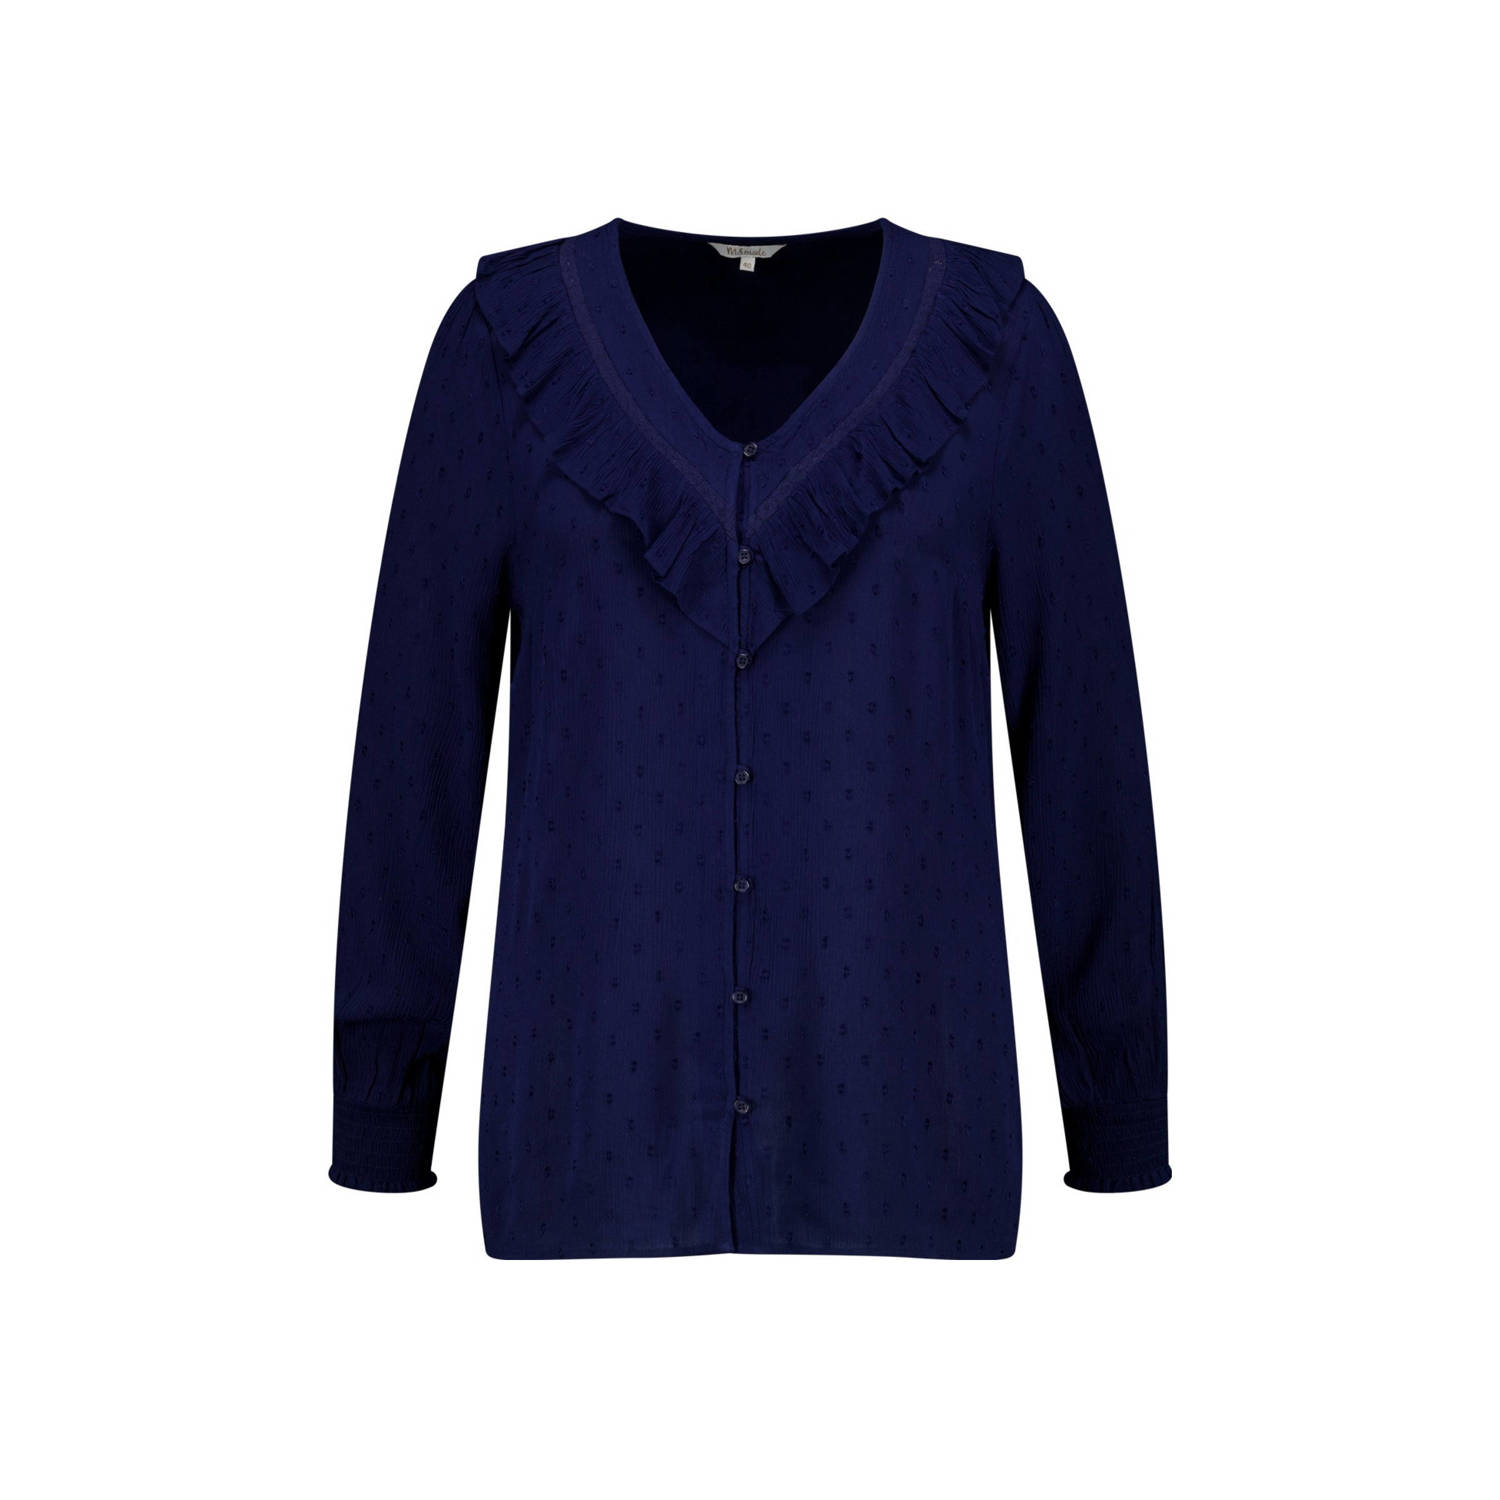 MS Mode blouse donkerblauw